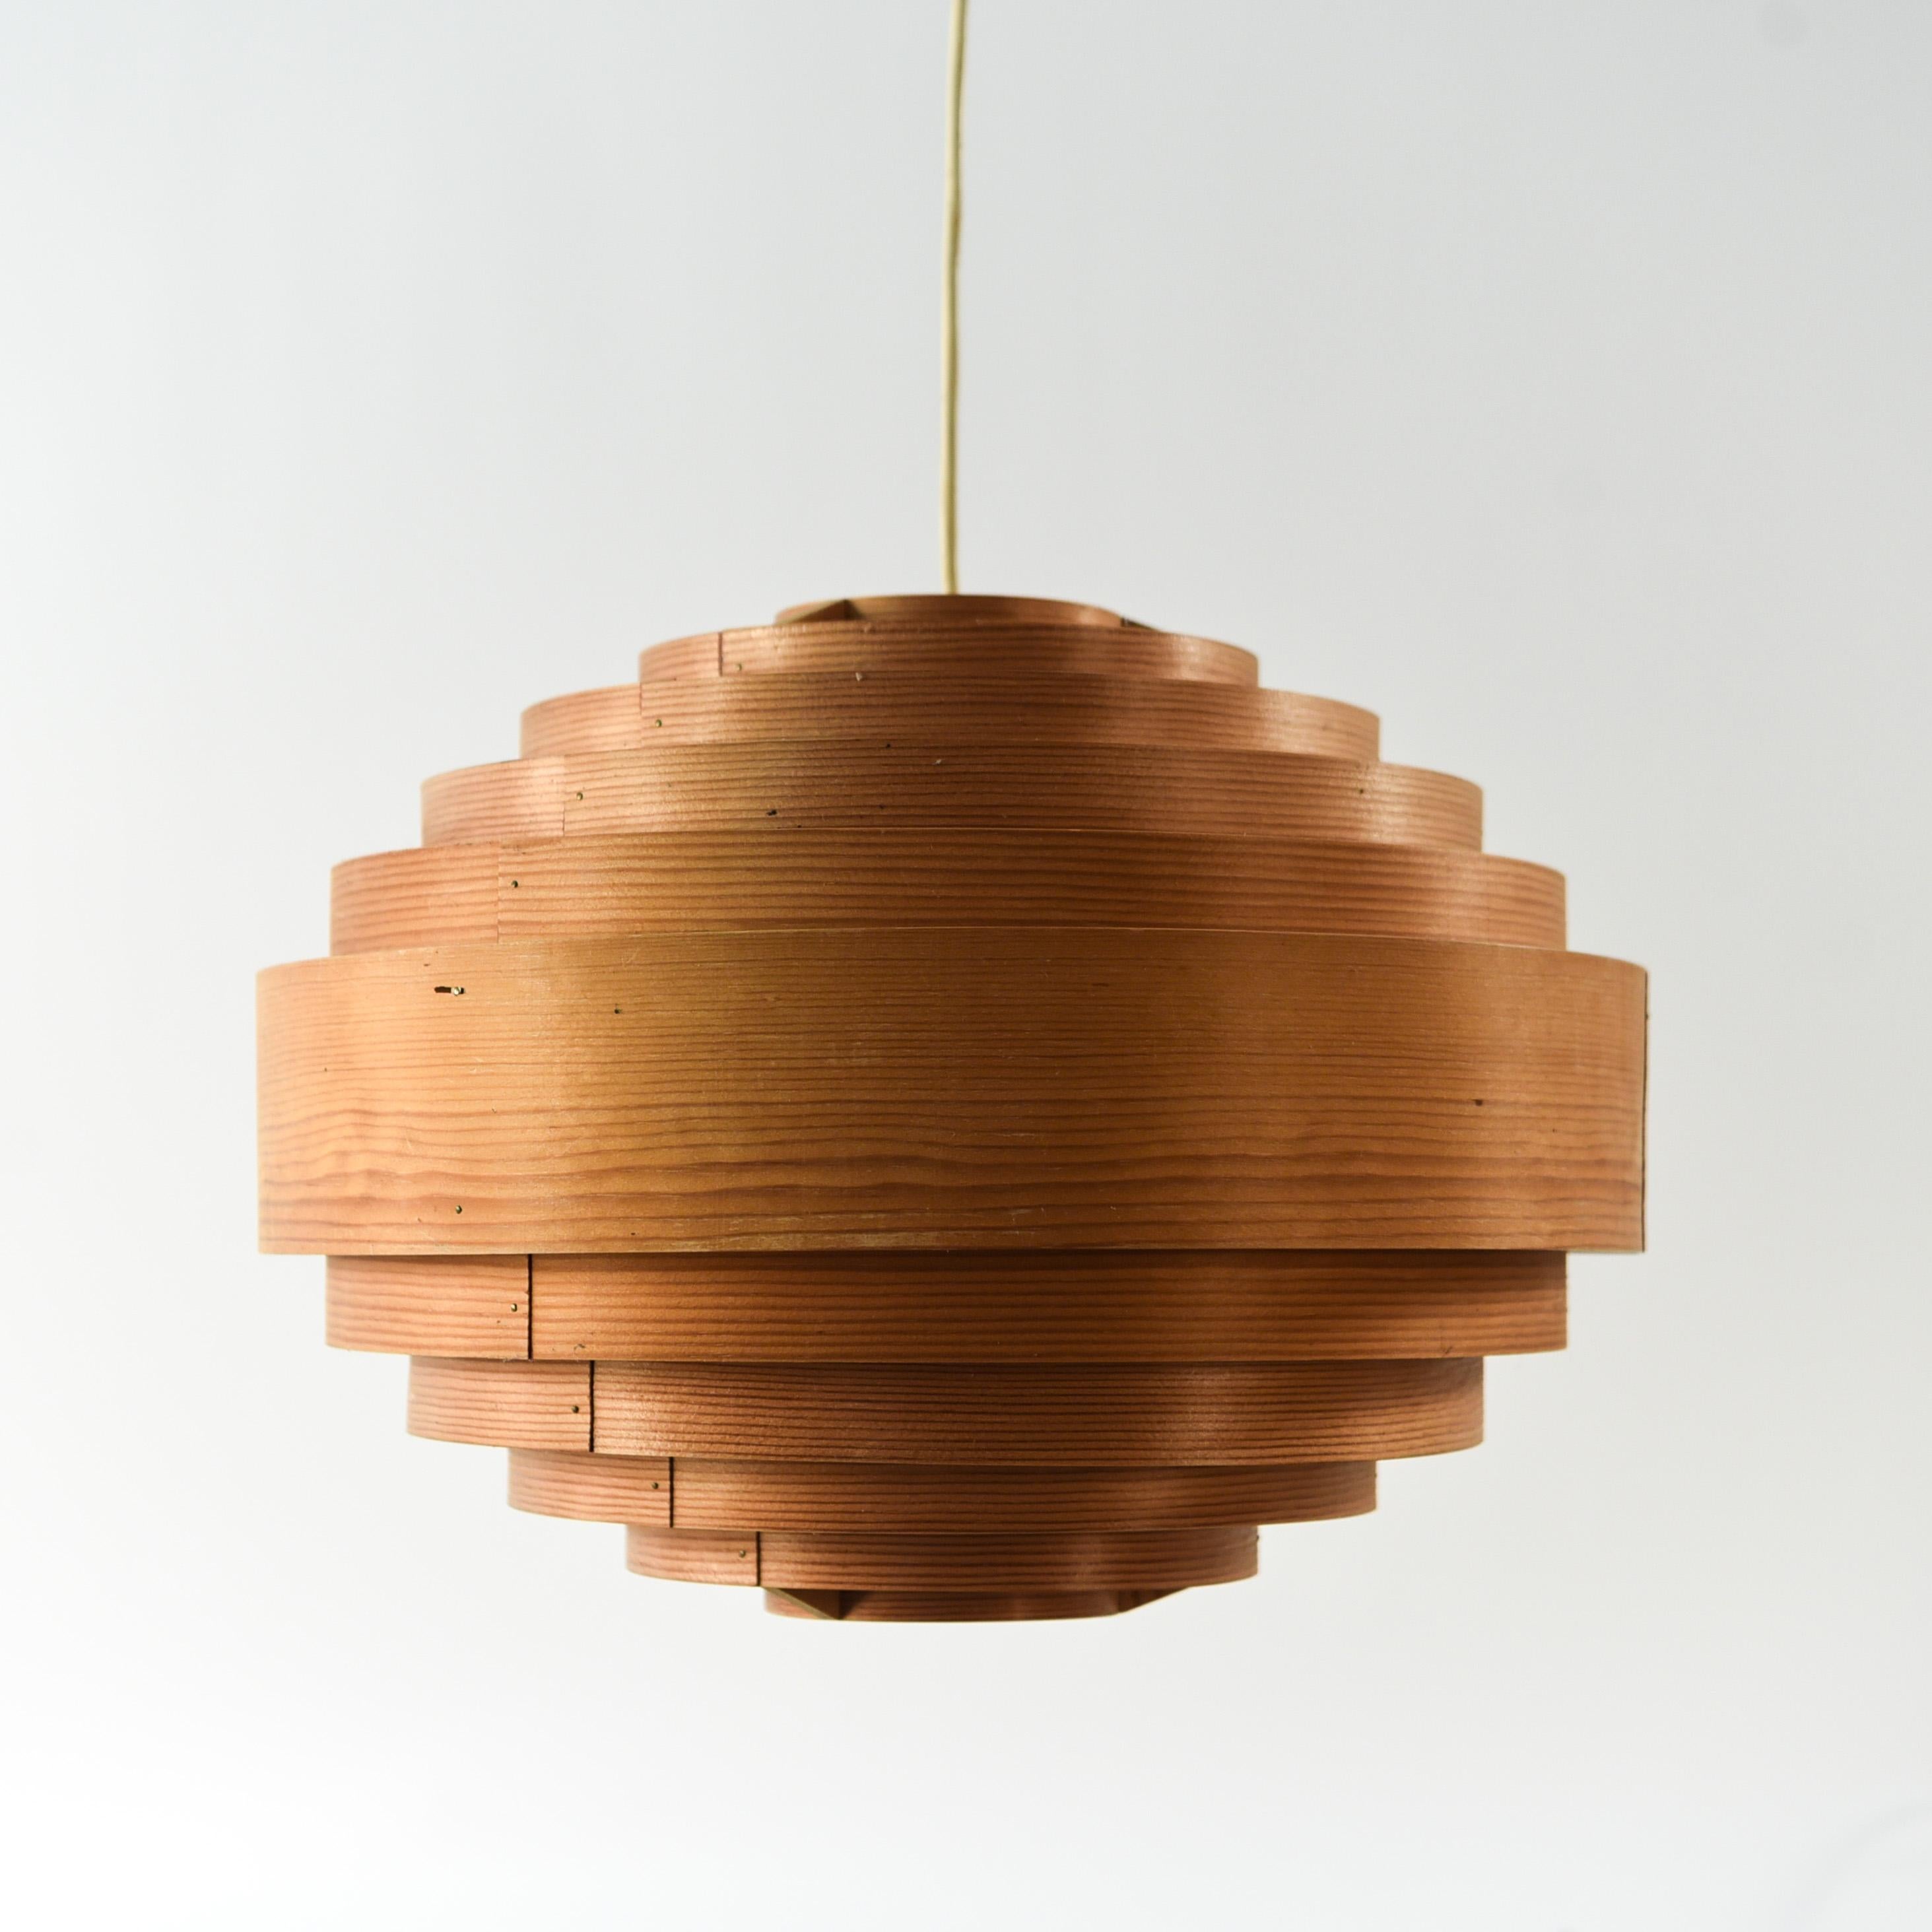 This is a rare chandelier designed by Hans Agne Jakobsson for Ellysett. This piece is made of pine wood in a stepped spherical design. This piece has a natural, warm glow when illuminated, and has a pleasing, rustic appearance even when its light is